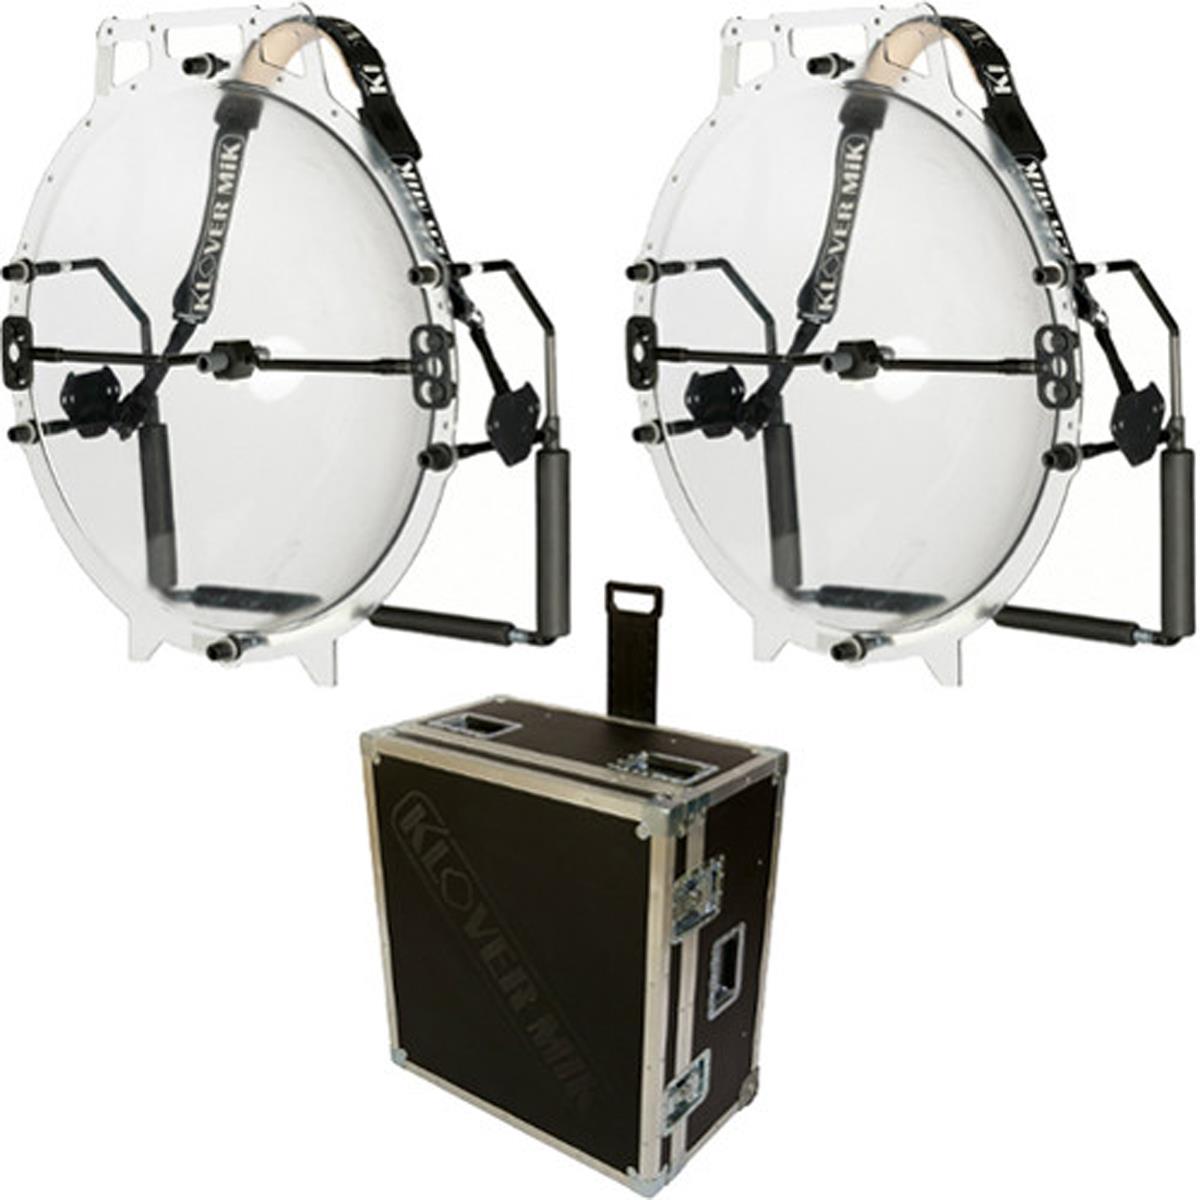 Image of Klover Dual MiK 26 Parabolic Collector Kit